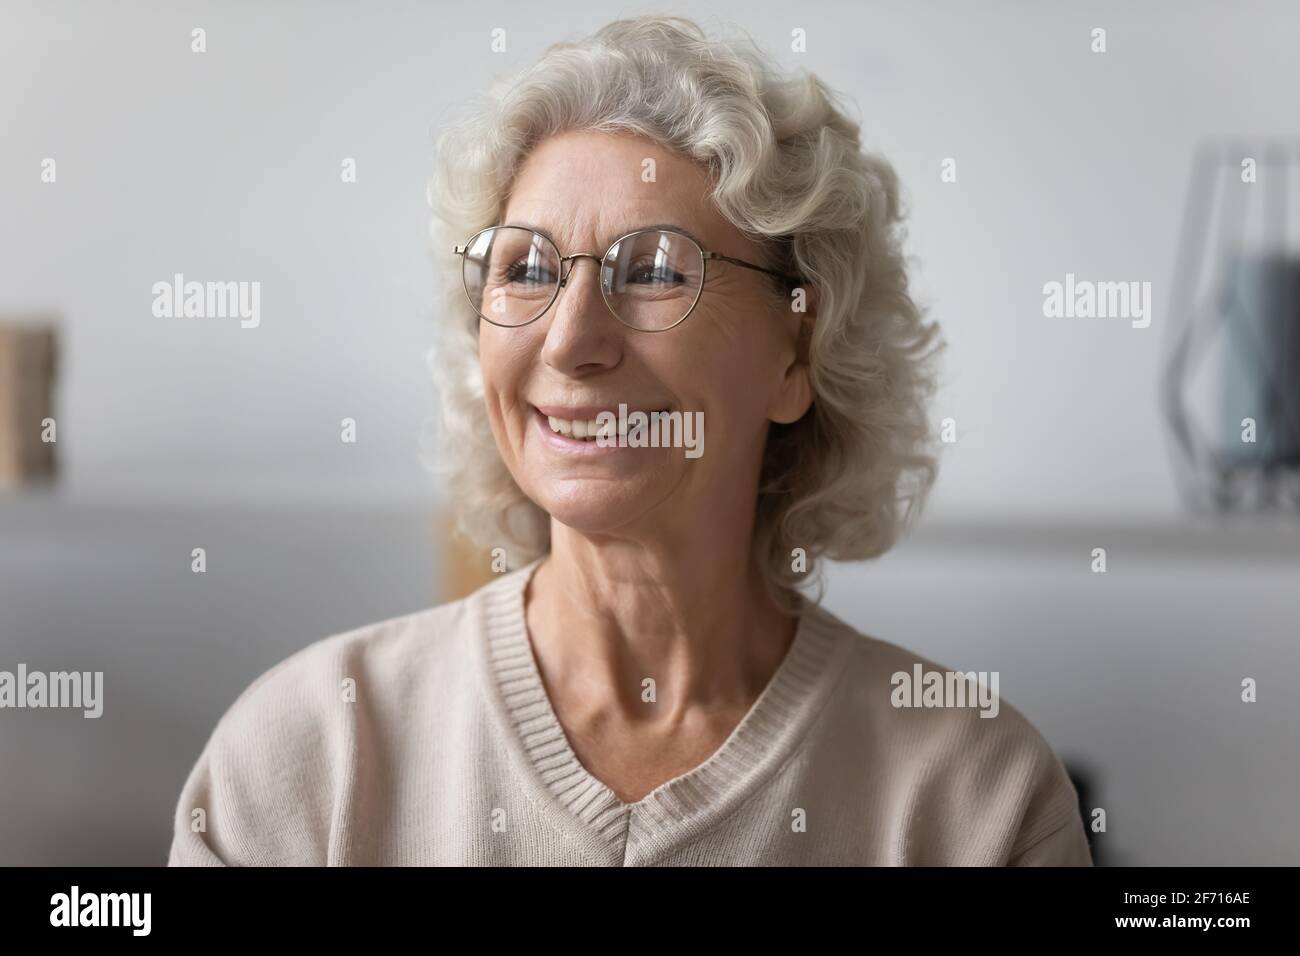 Happy pensive elderly lady wearing glasses, looking at window Stock Photo